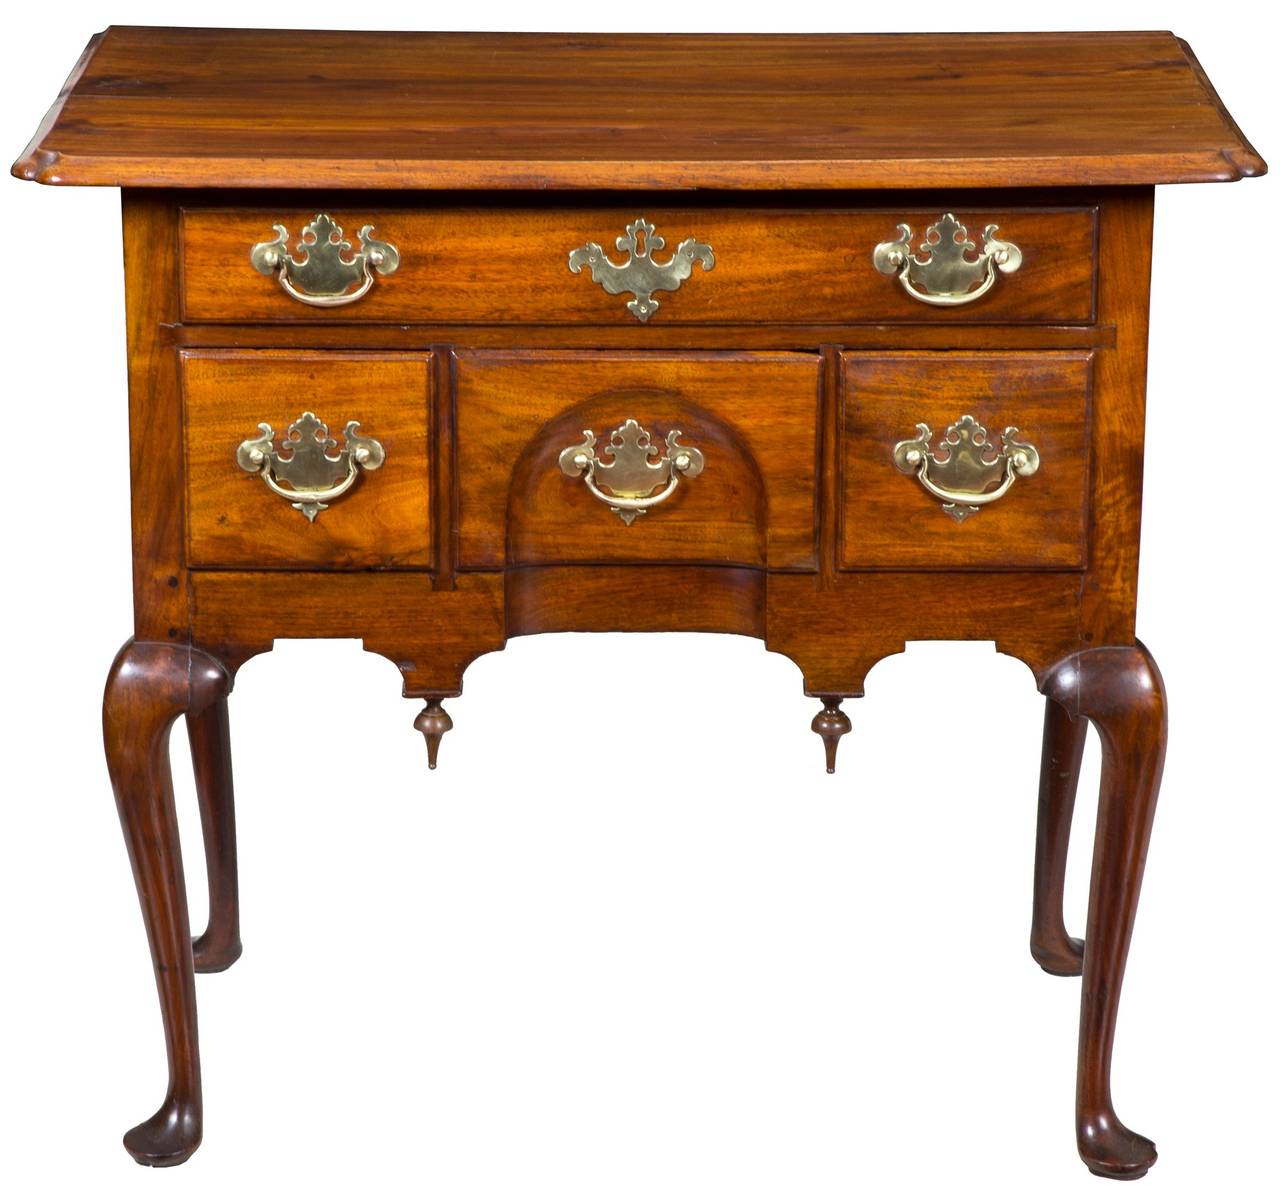 This lowboy has a very large overhang, which is a most desirable feature for this form, and the corners are beautifully pinched and molded. The entire piece, including the top, has striped walnut with beautiful graining and warm color that is the